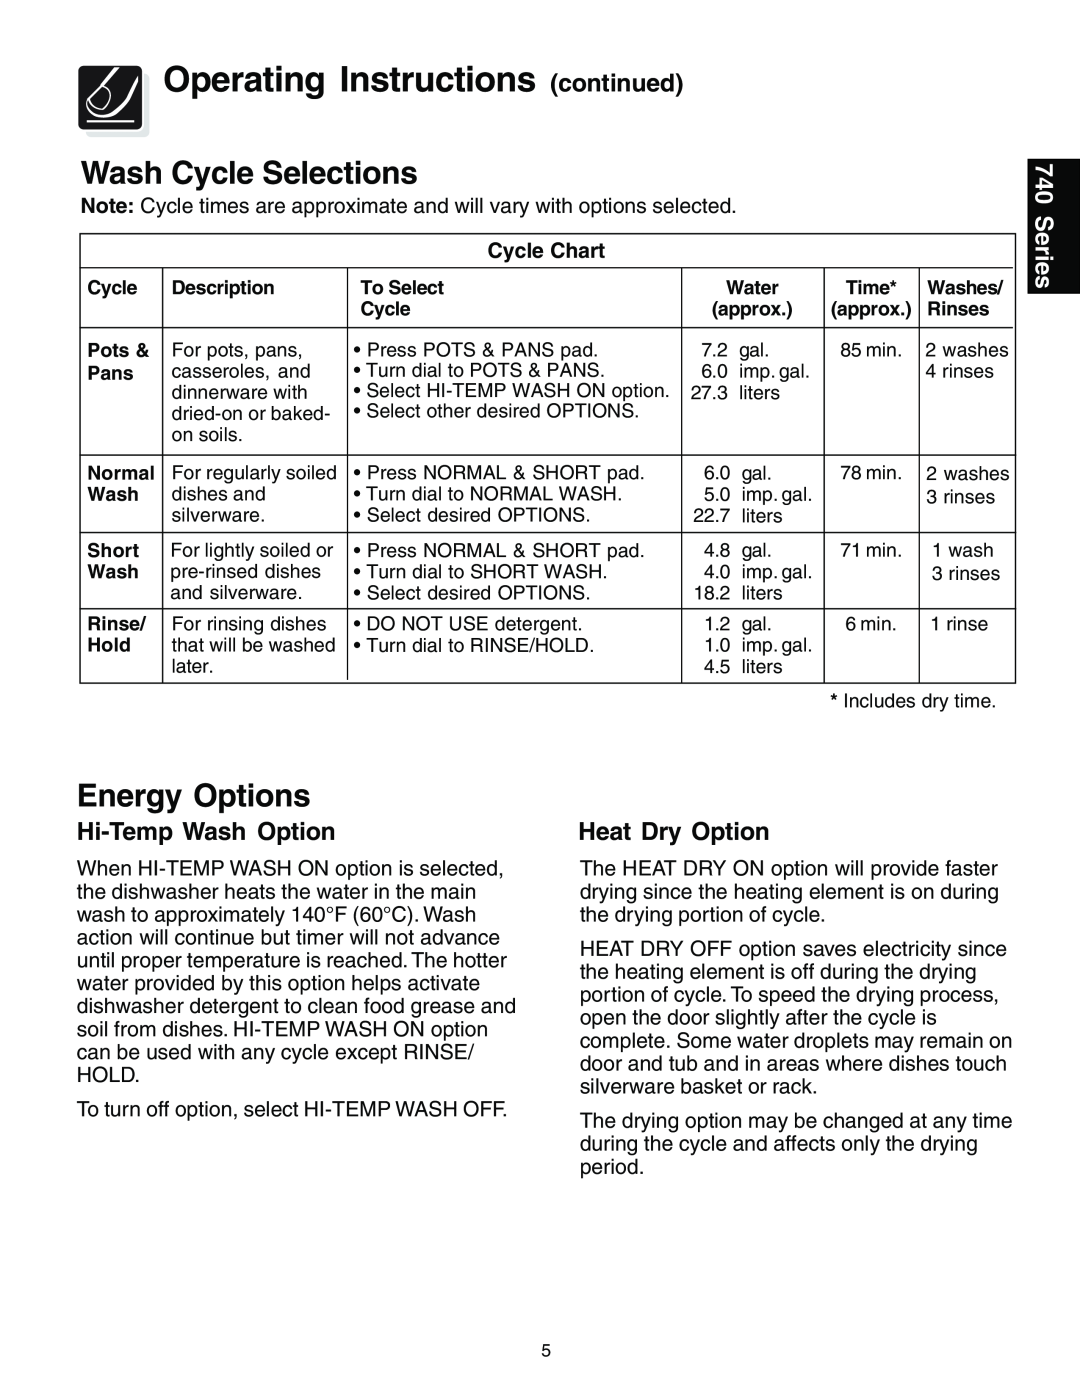 Frigidaire 750, 740 warranty Wash Cycle Selections, Energy Options, Series, Operating Instructions continued, Cycle Chart 